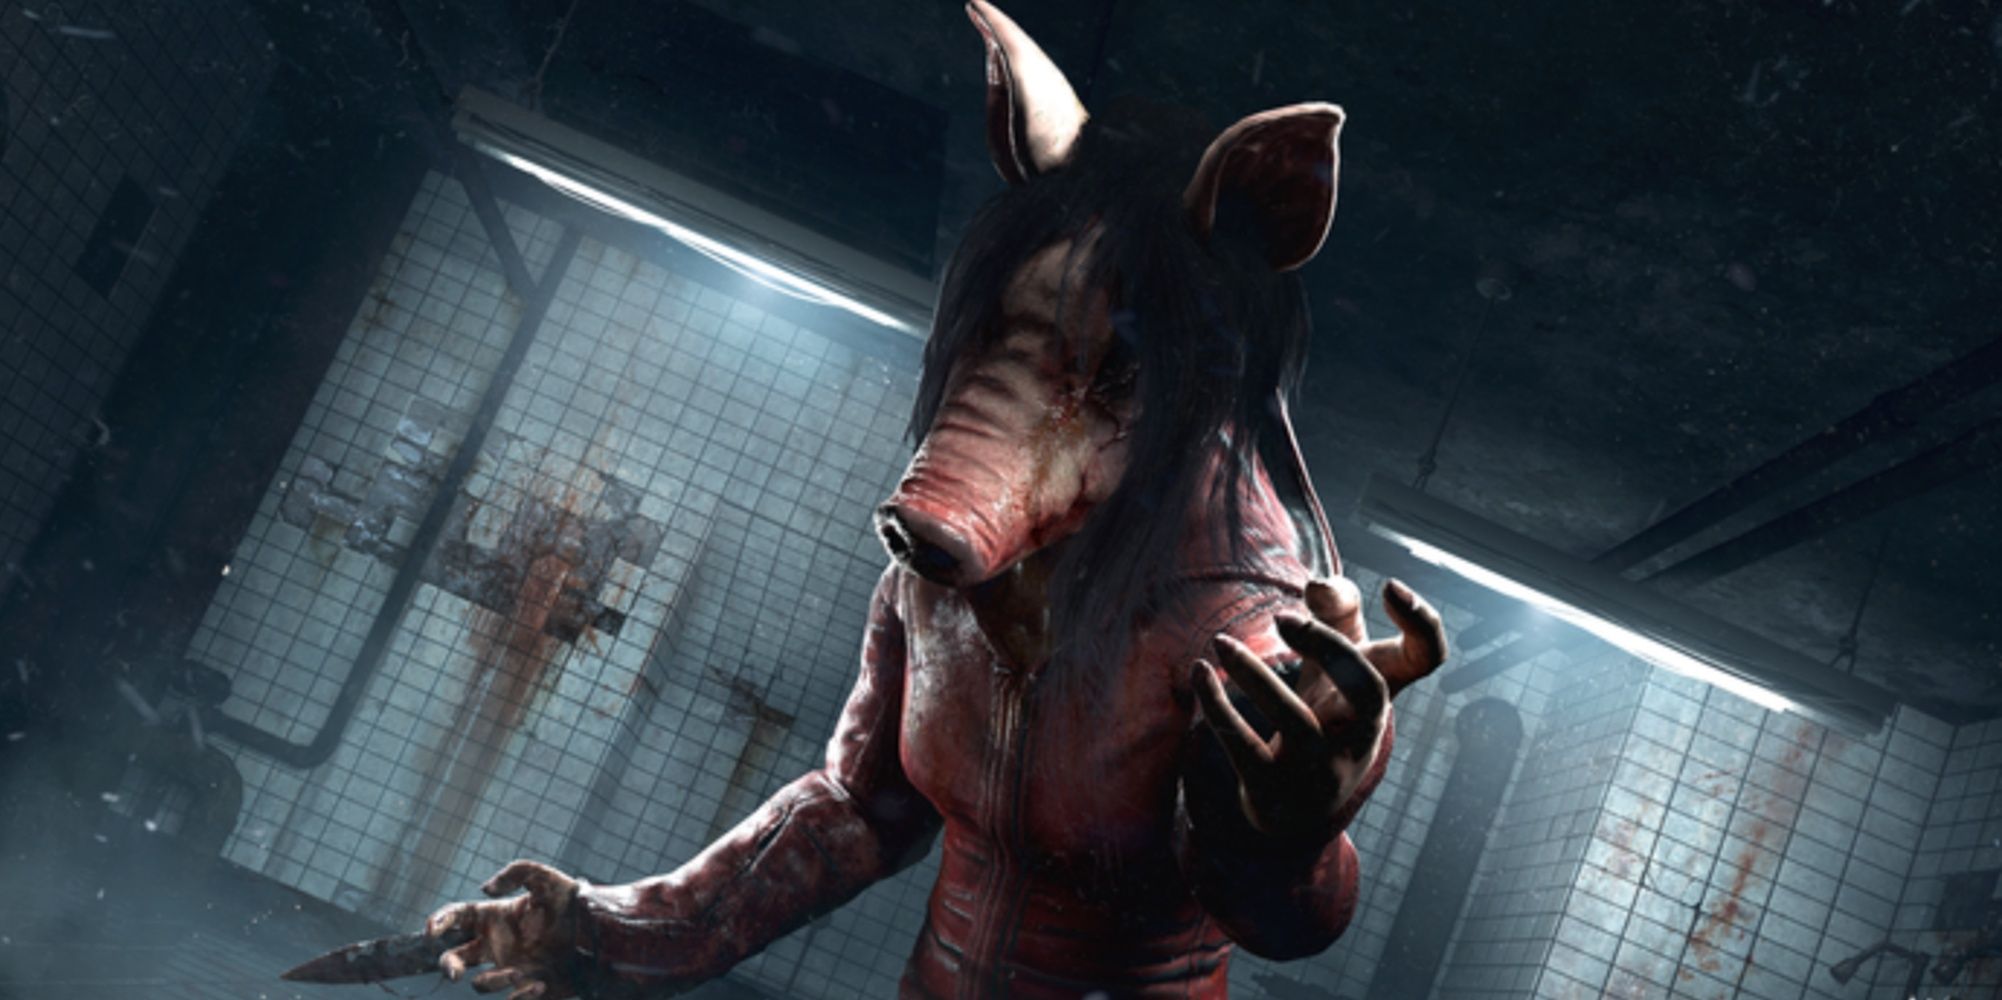 Dead By Daylight: The Pig Character Model